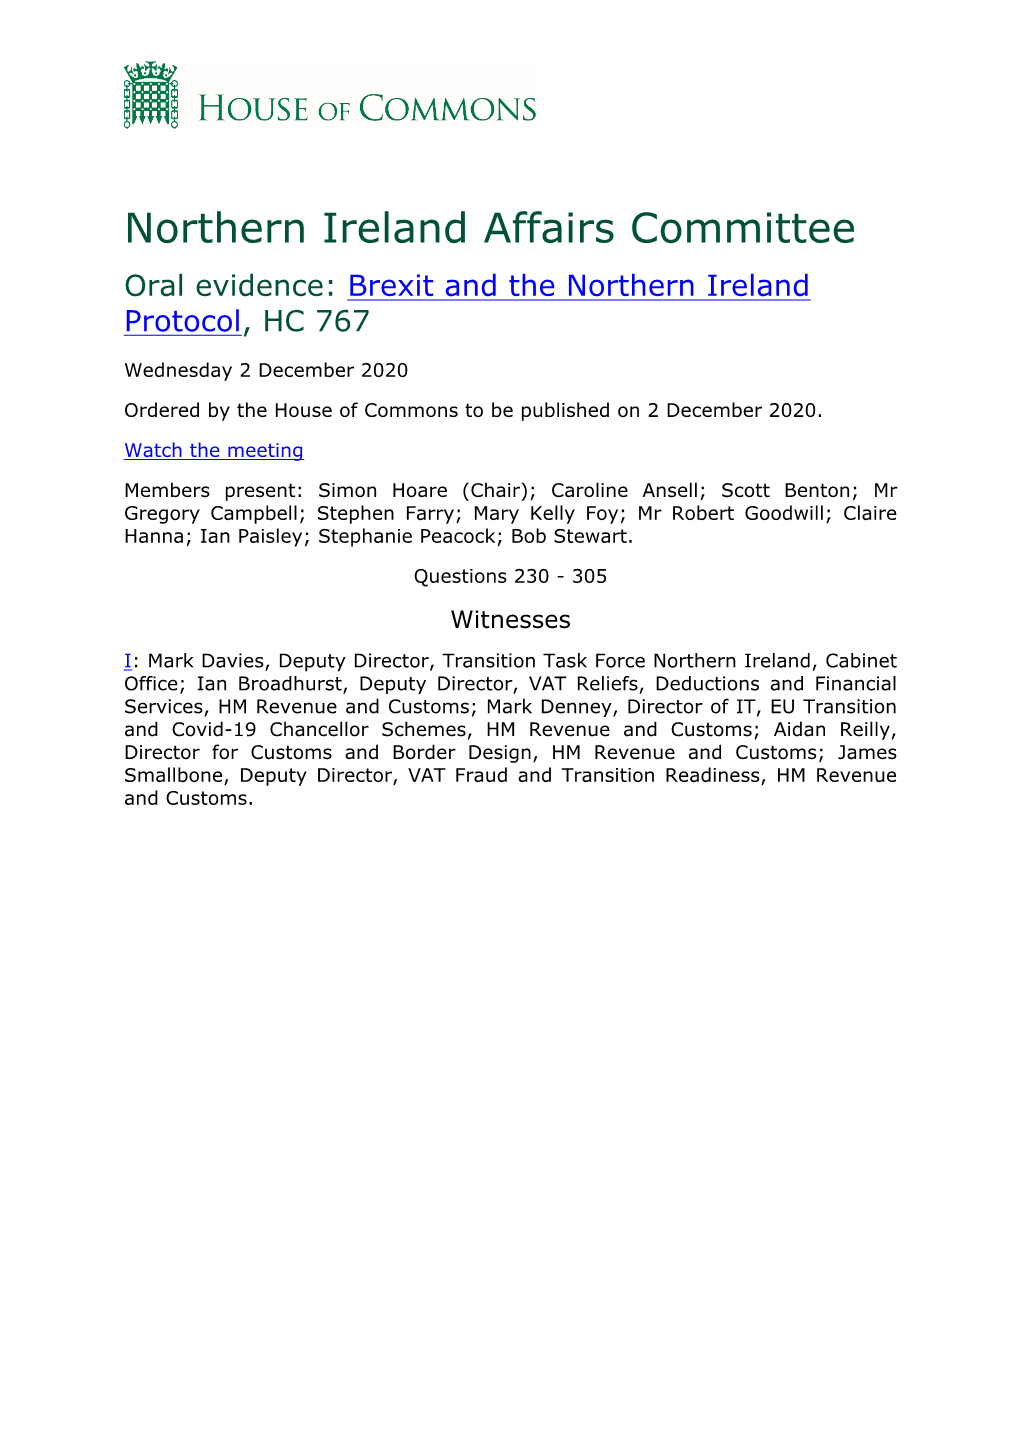 Northern Ireland Affairs Committee Oral Evidence: Brexit and the Northern Ireland Protocol, HC 767